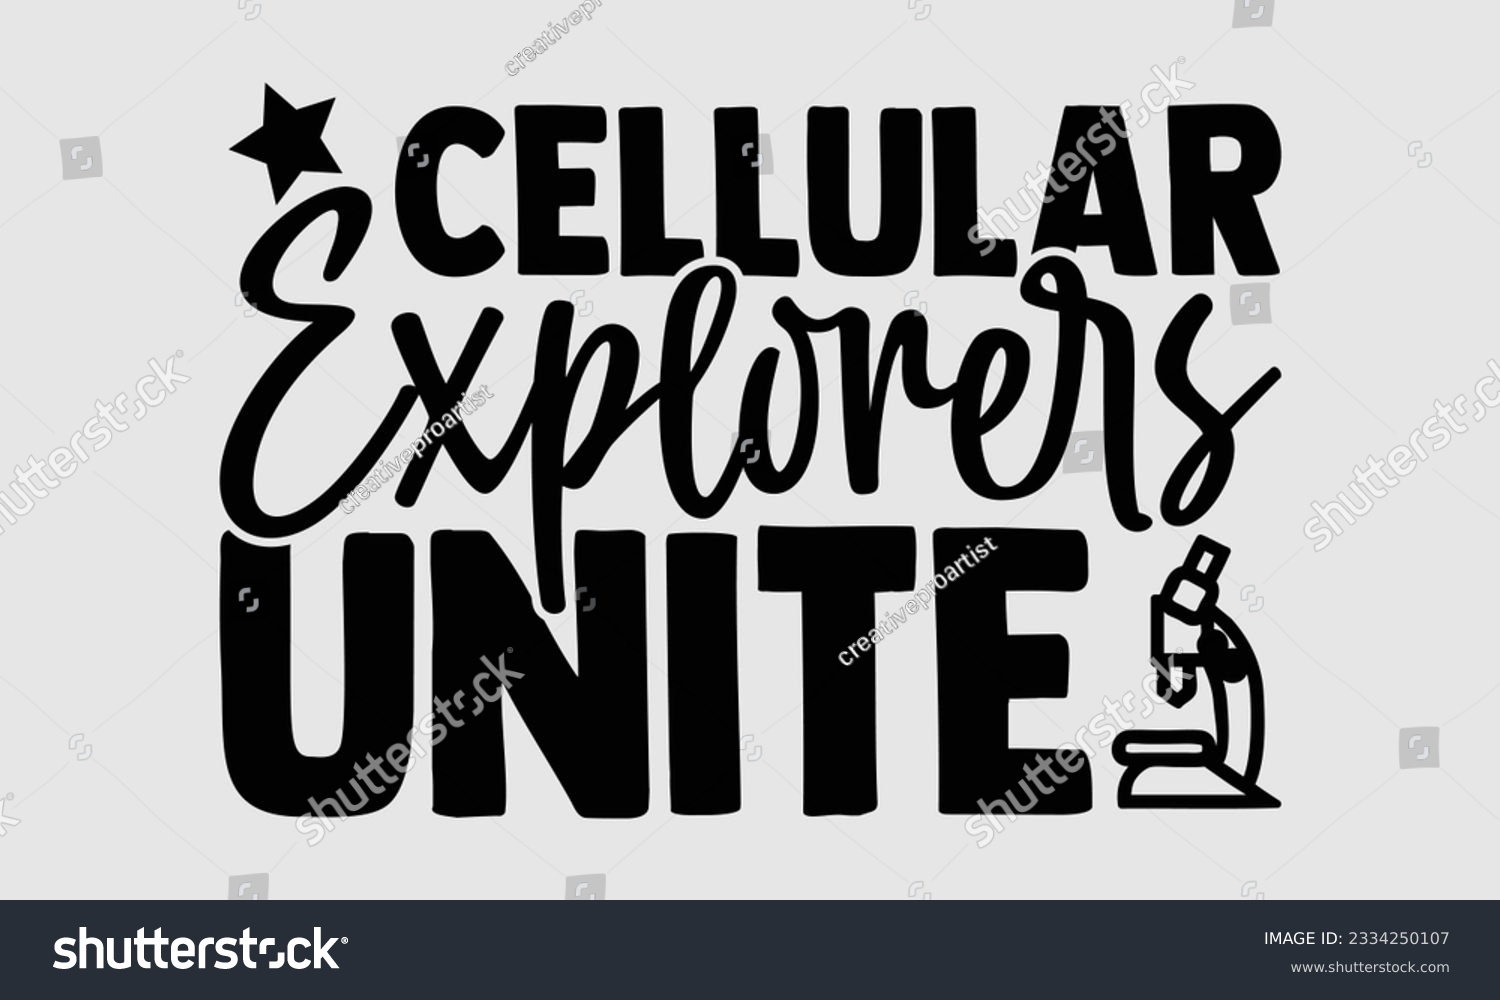 SVG of Cellular Explorers Unite- Biologist t- shirt design, Hand written vector Illustration Template for prints on SVG and bags, posters, cards svg